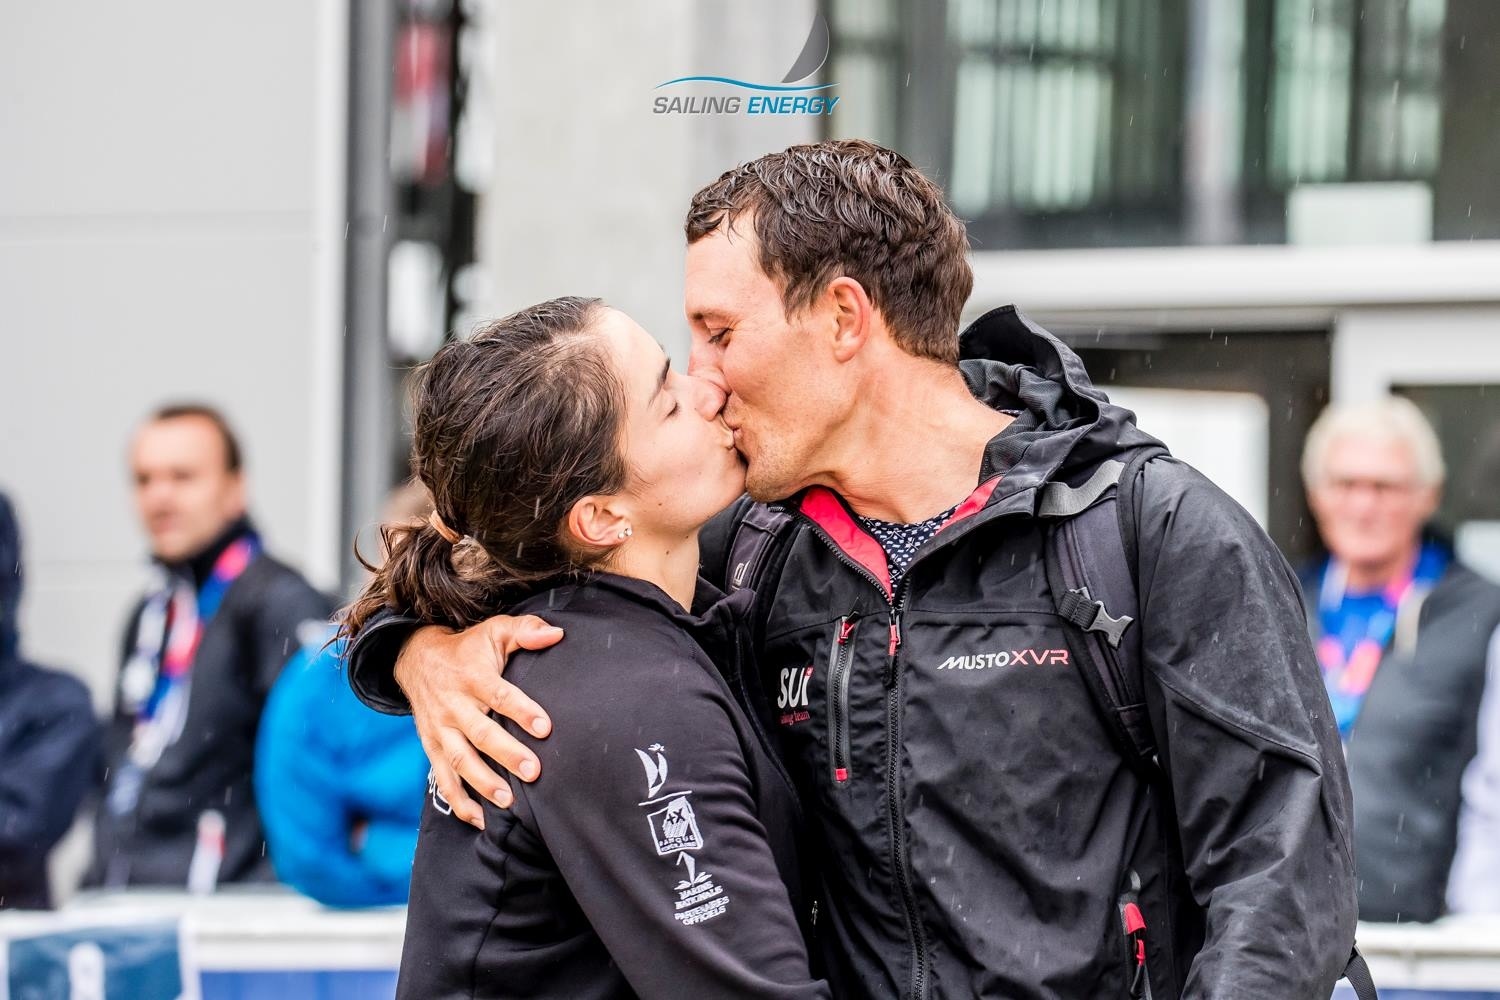 He competed in «Laser»class, she competed in RS:X.  He is 42nd, she is 10th, but what do ratings mean when there is love?